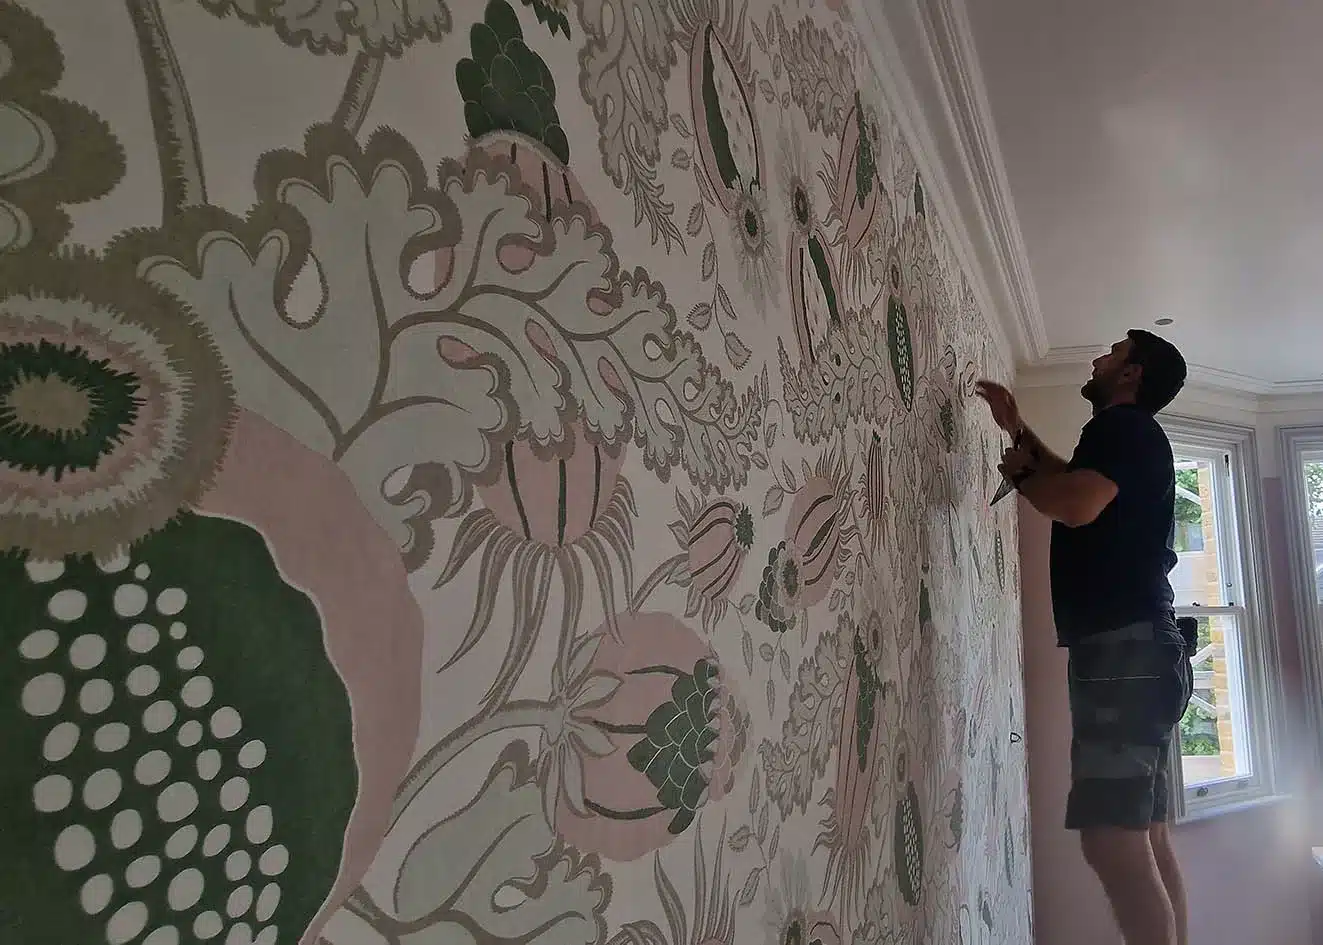 Transform bedroom with the right wallpaper. Wallpaper installer installing wallpaper.